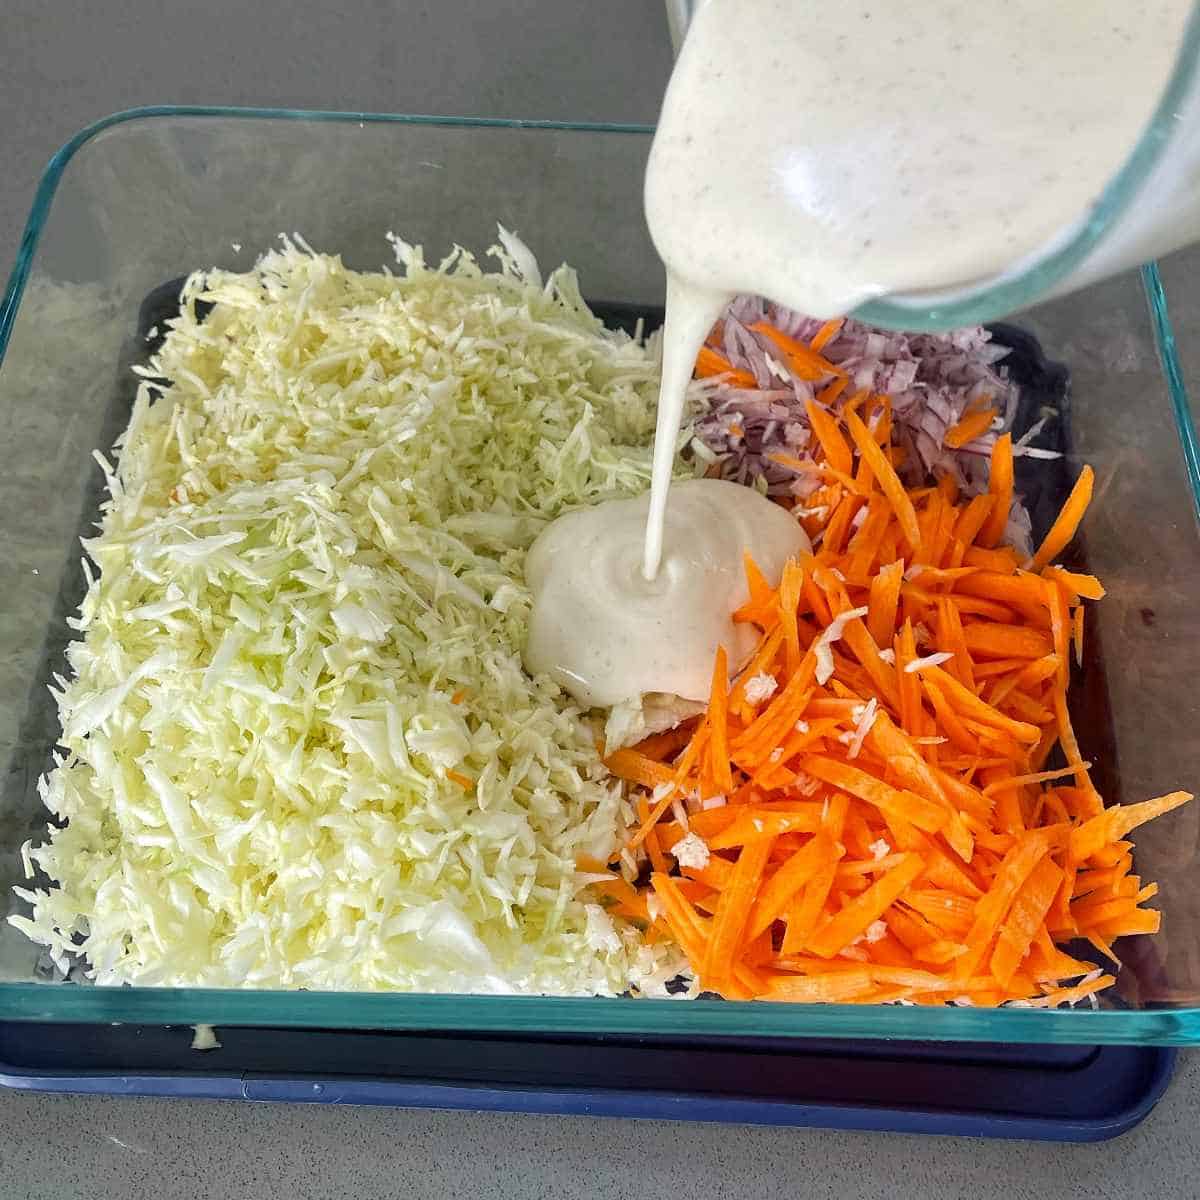 the sliced and grated ingredients for Coleslaw in a glass dish with the dressing being poured over the top.